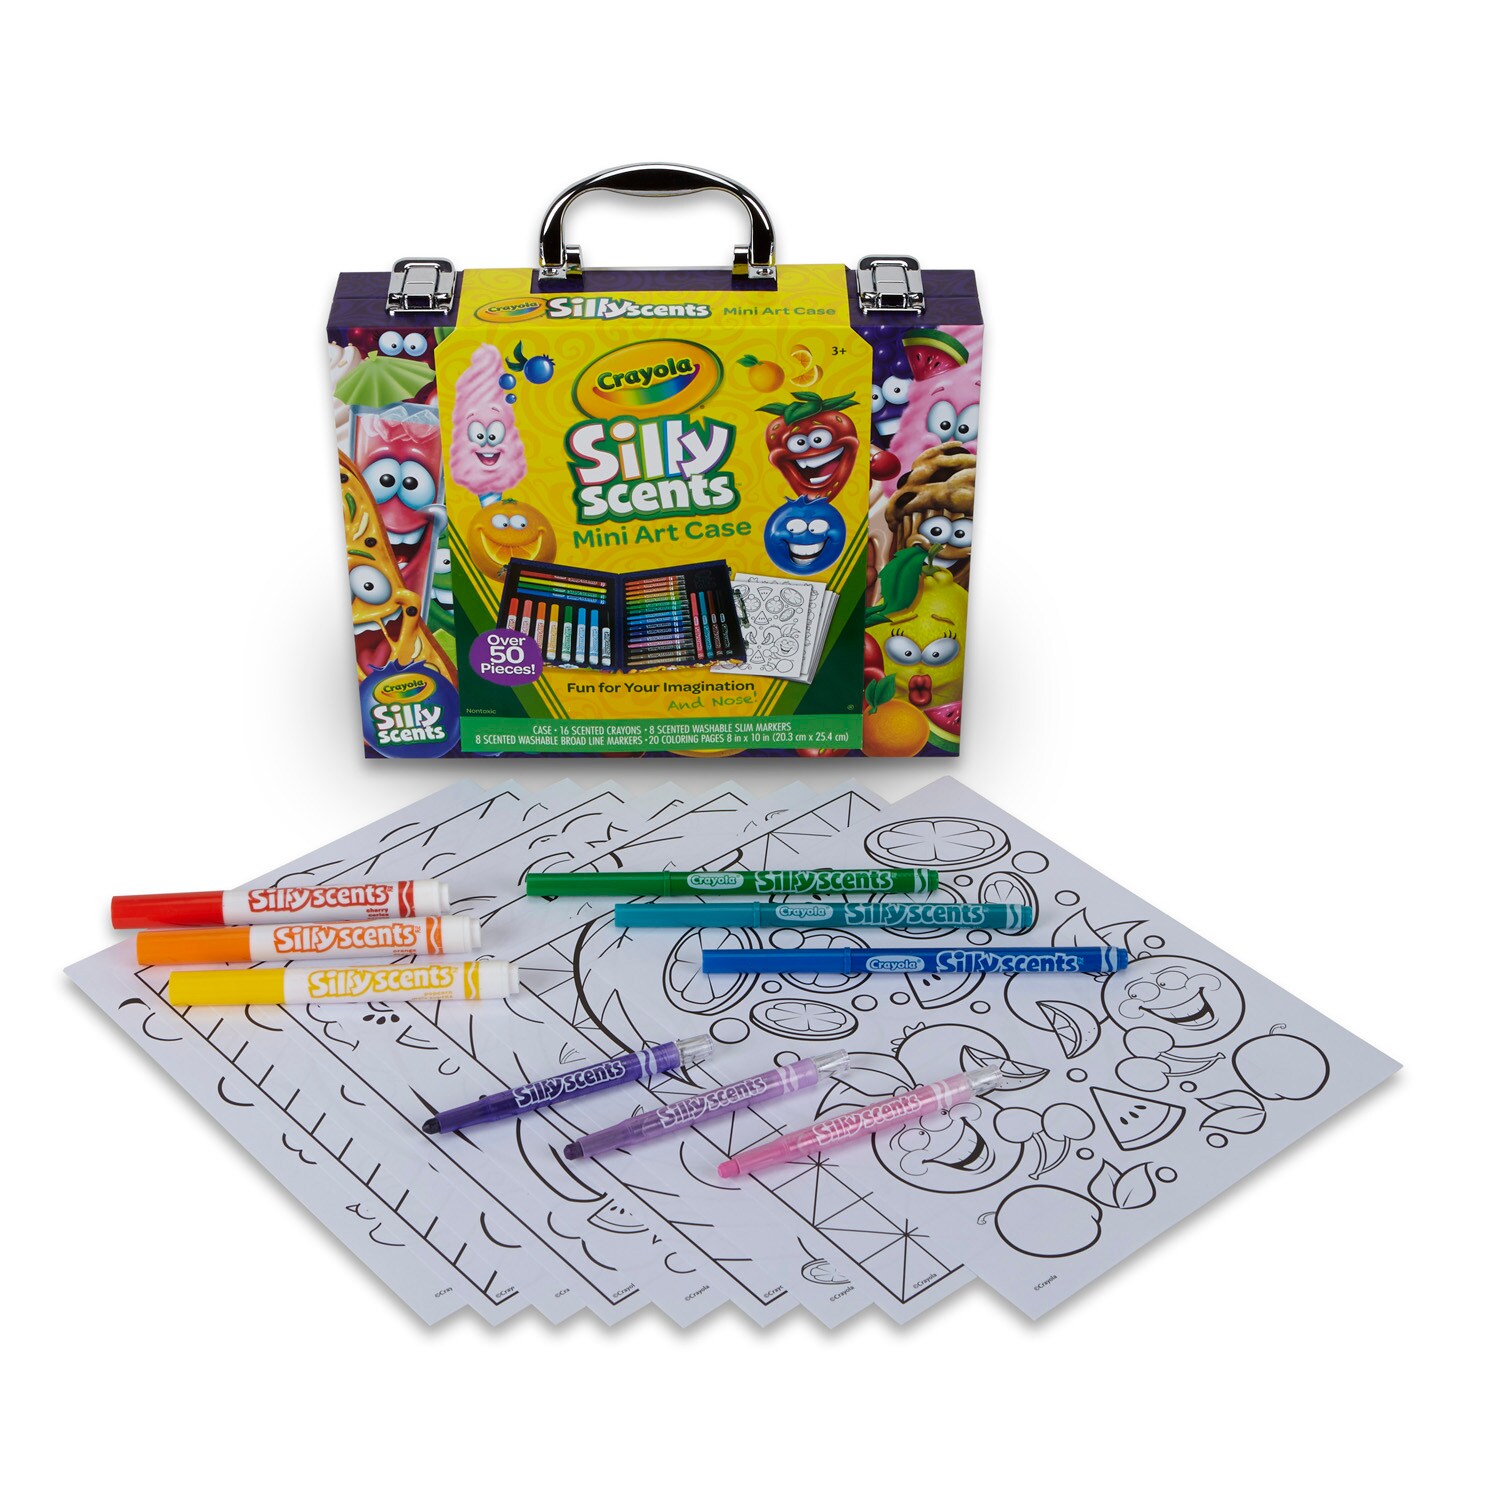 Crayola Silly Scents Mini Inspiration Art Case Coloring Set, Scented  Coloring Supplies, Beginner Child, 50 Pieces